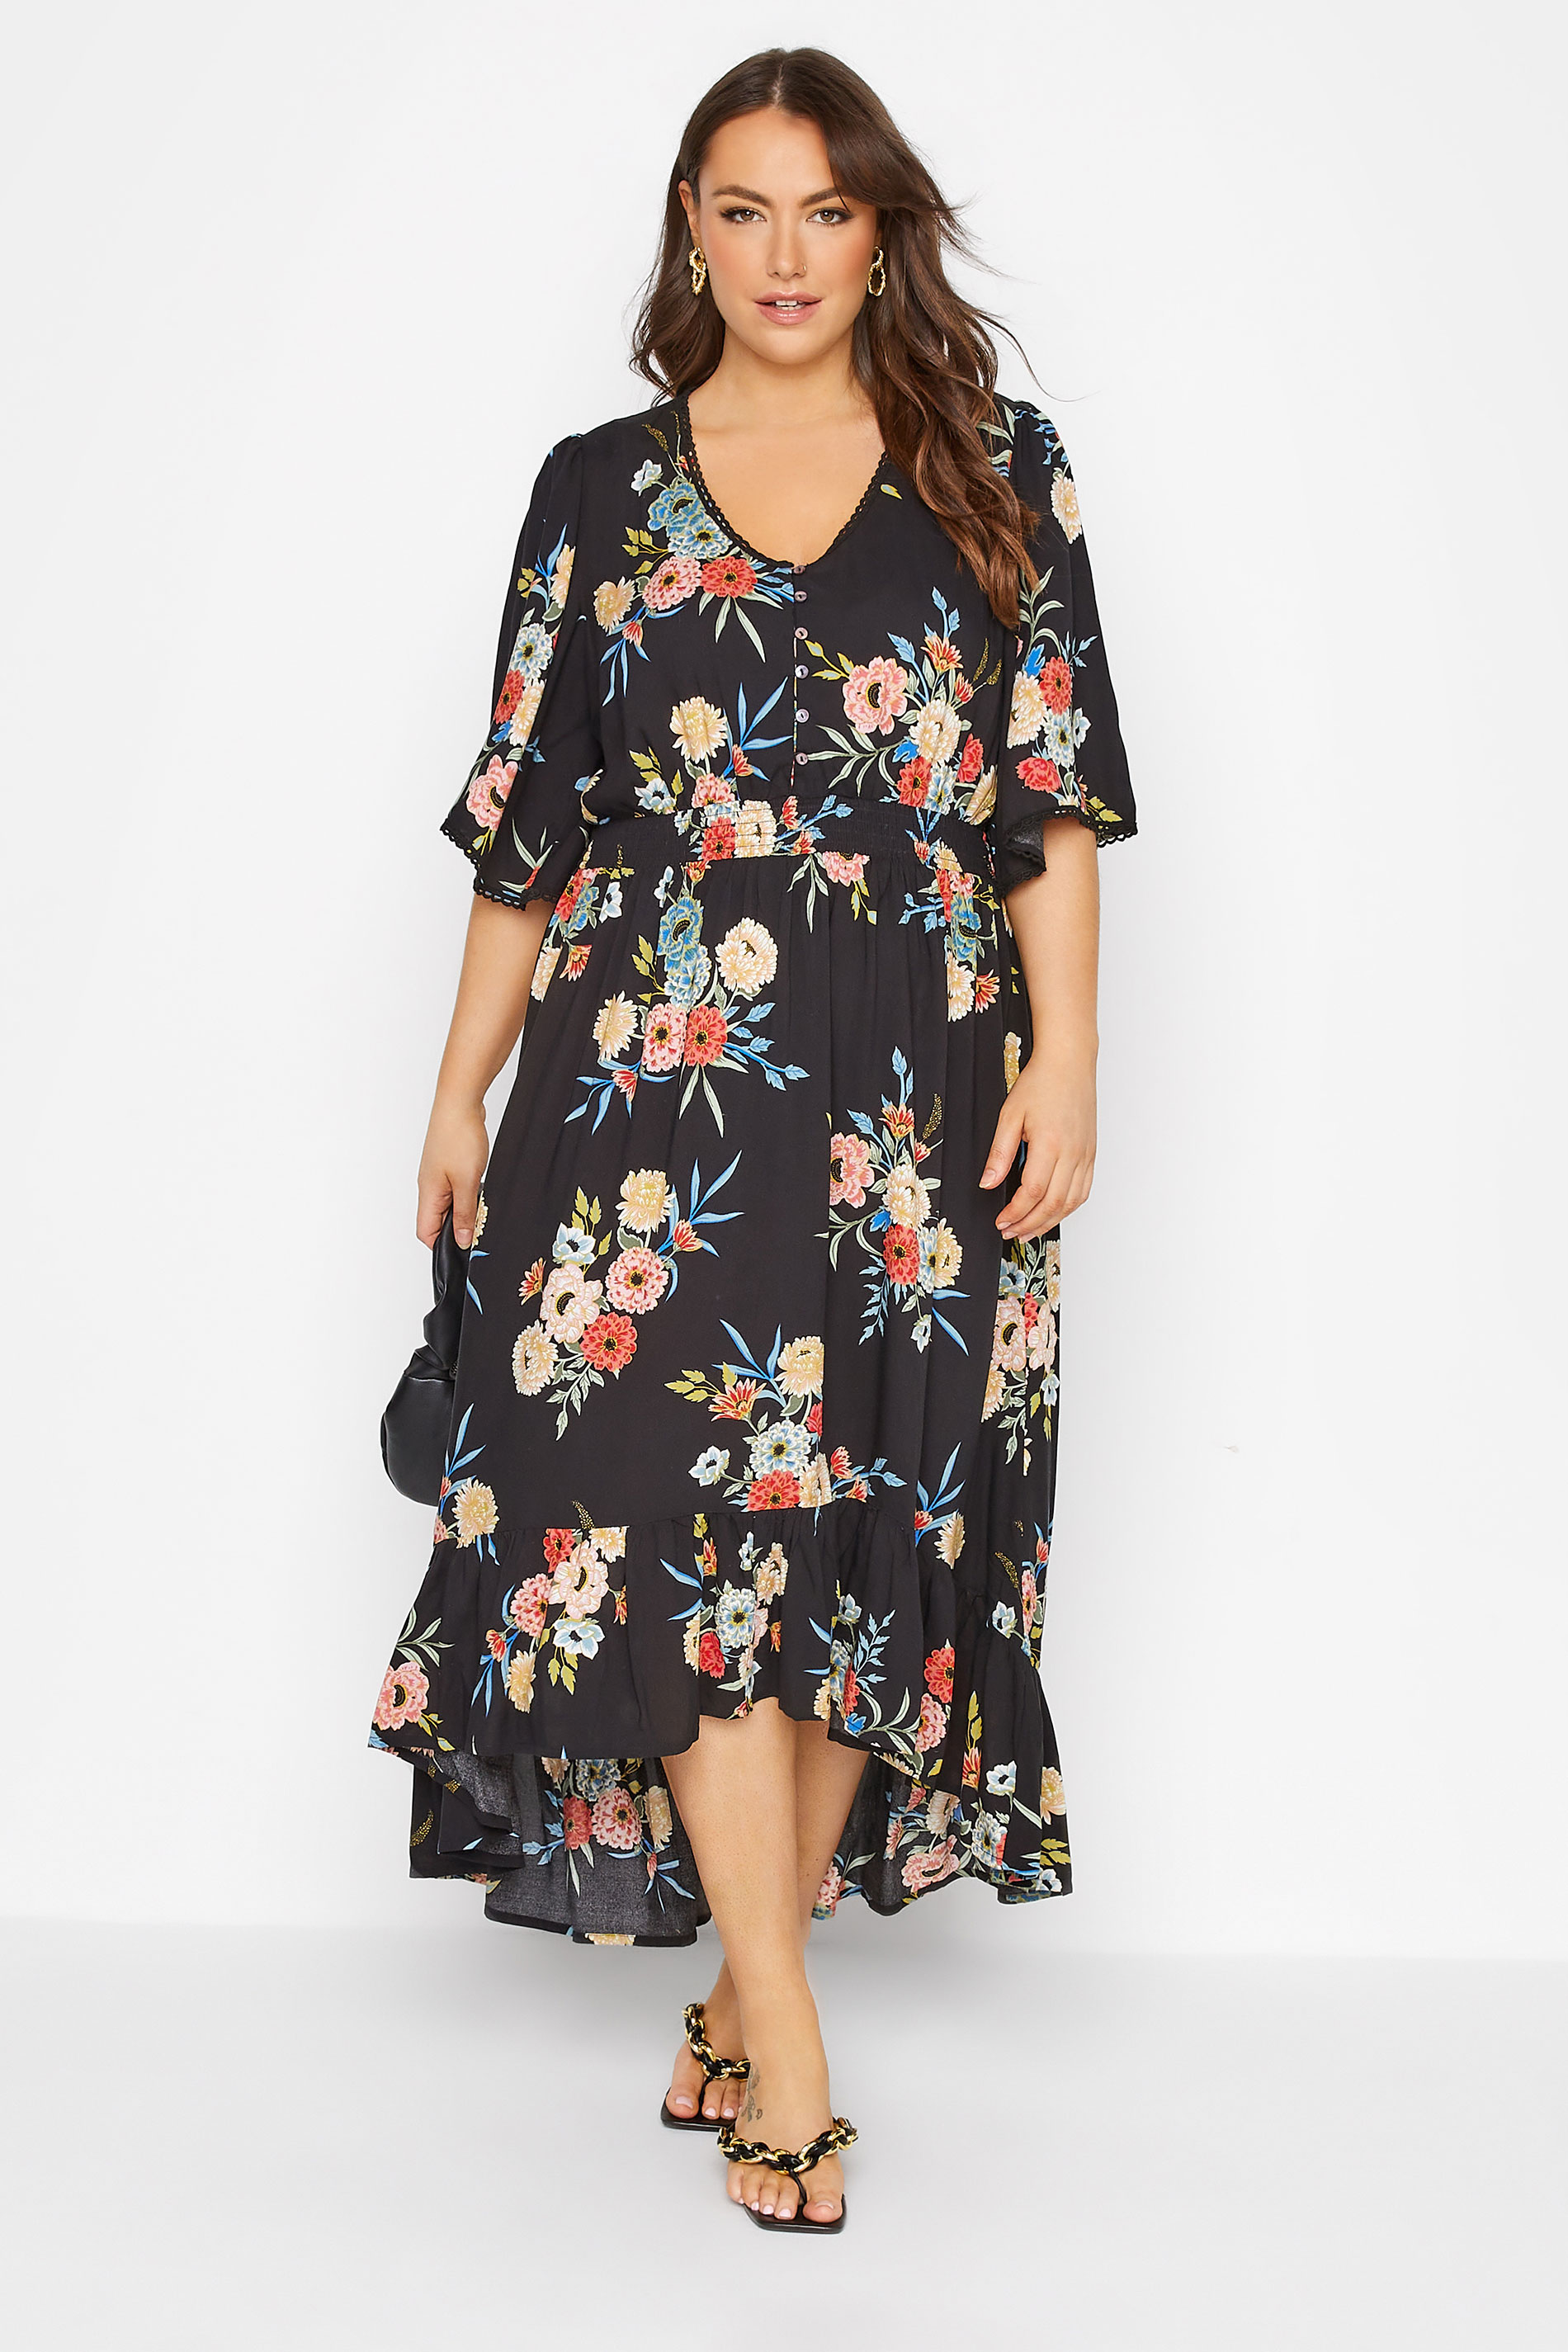 Plus Size Black Floral High Low Dress | Yours Clothing 1